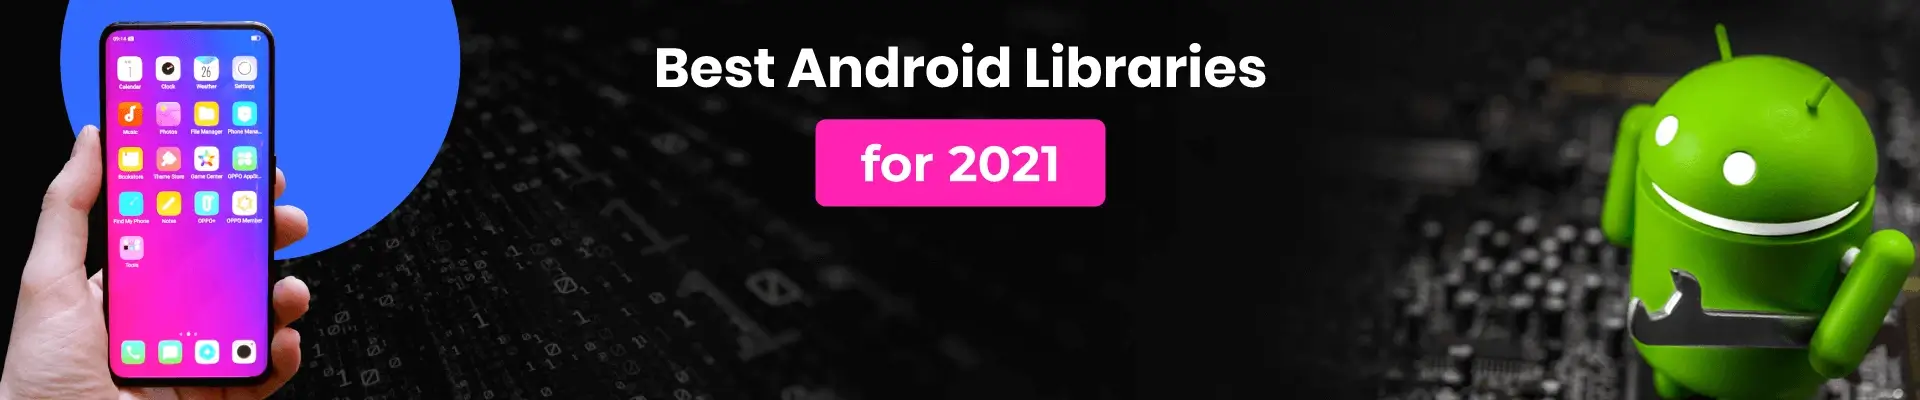 Best Android Libraries For Android App Development in 2021